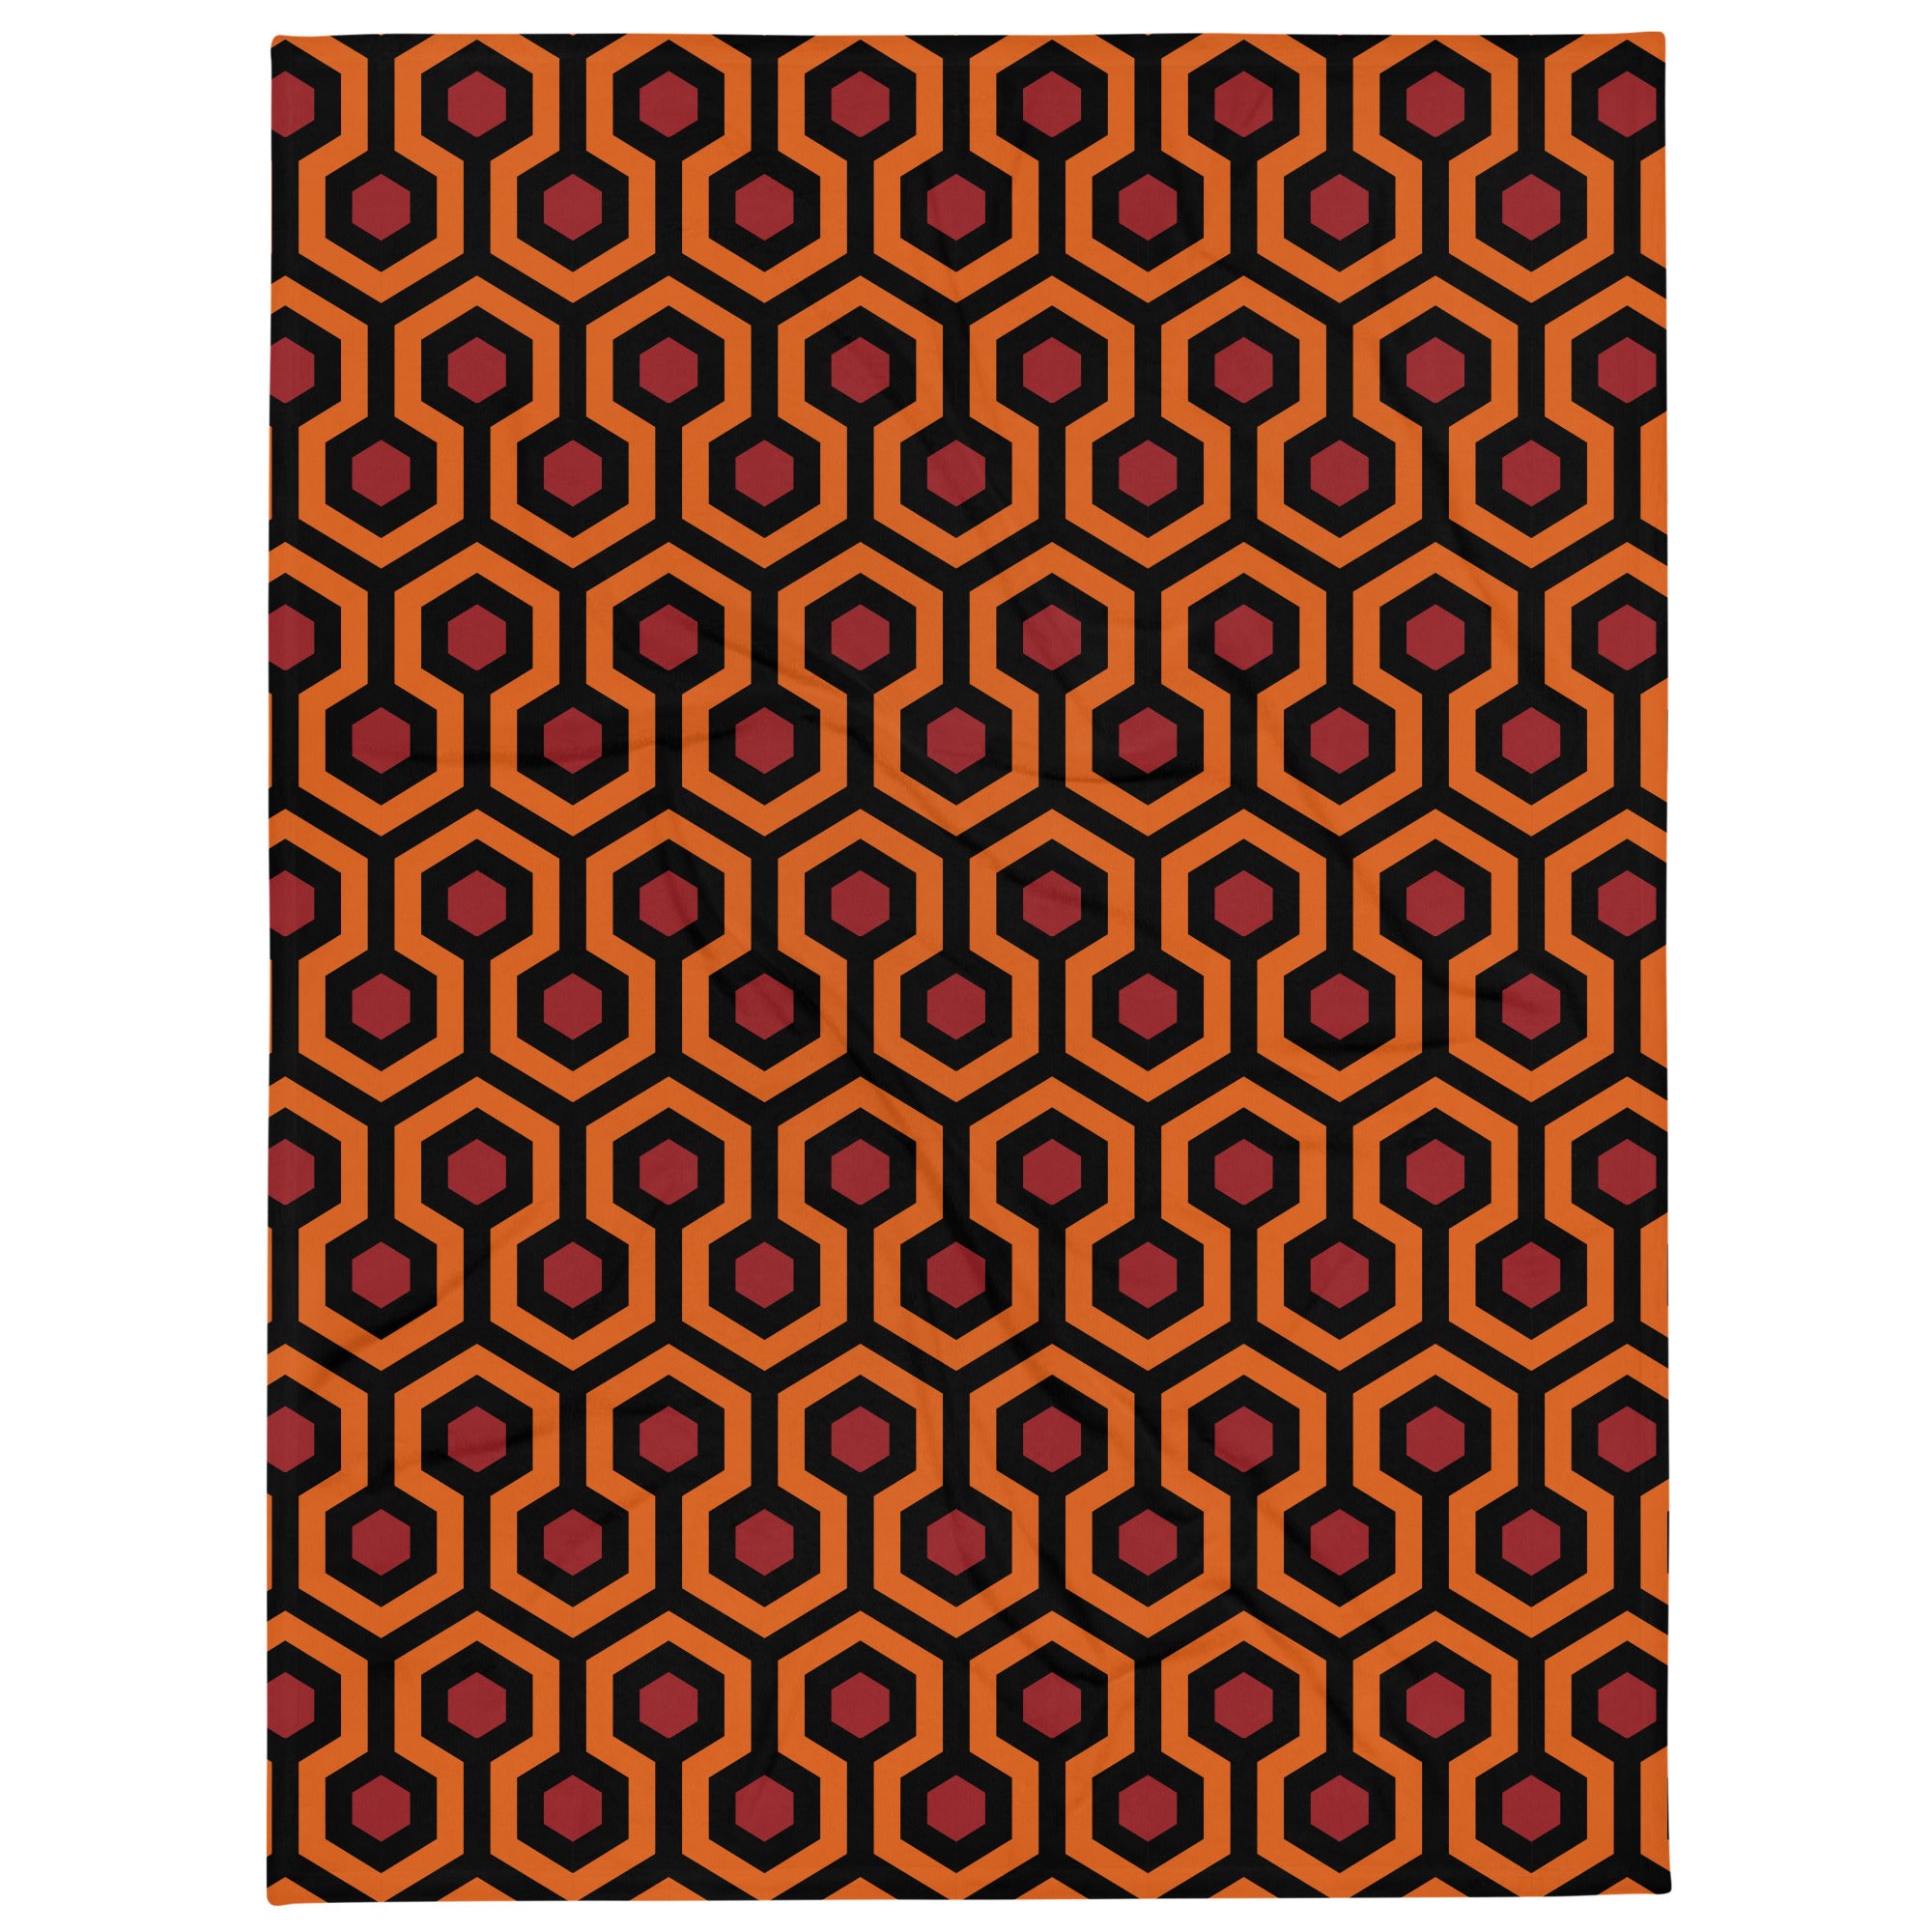 The Shining Carpet Patterned Throw Blanket